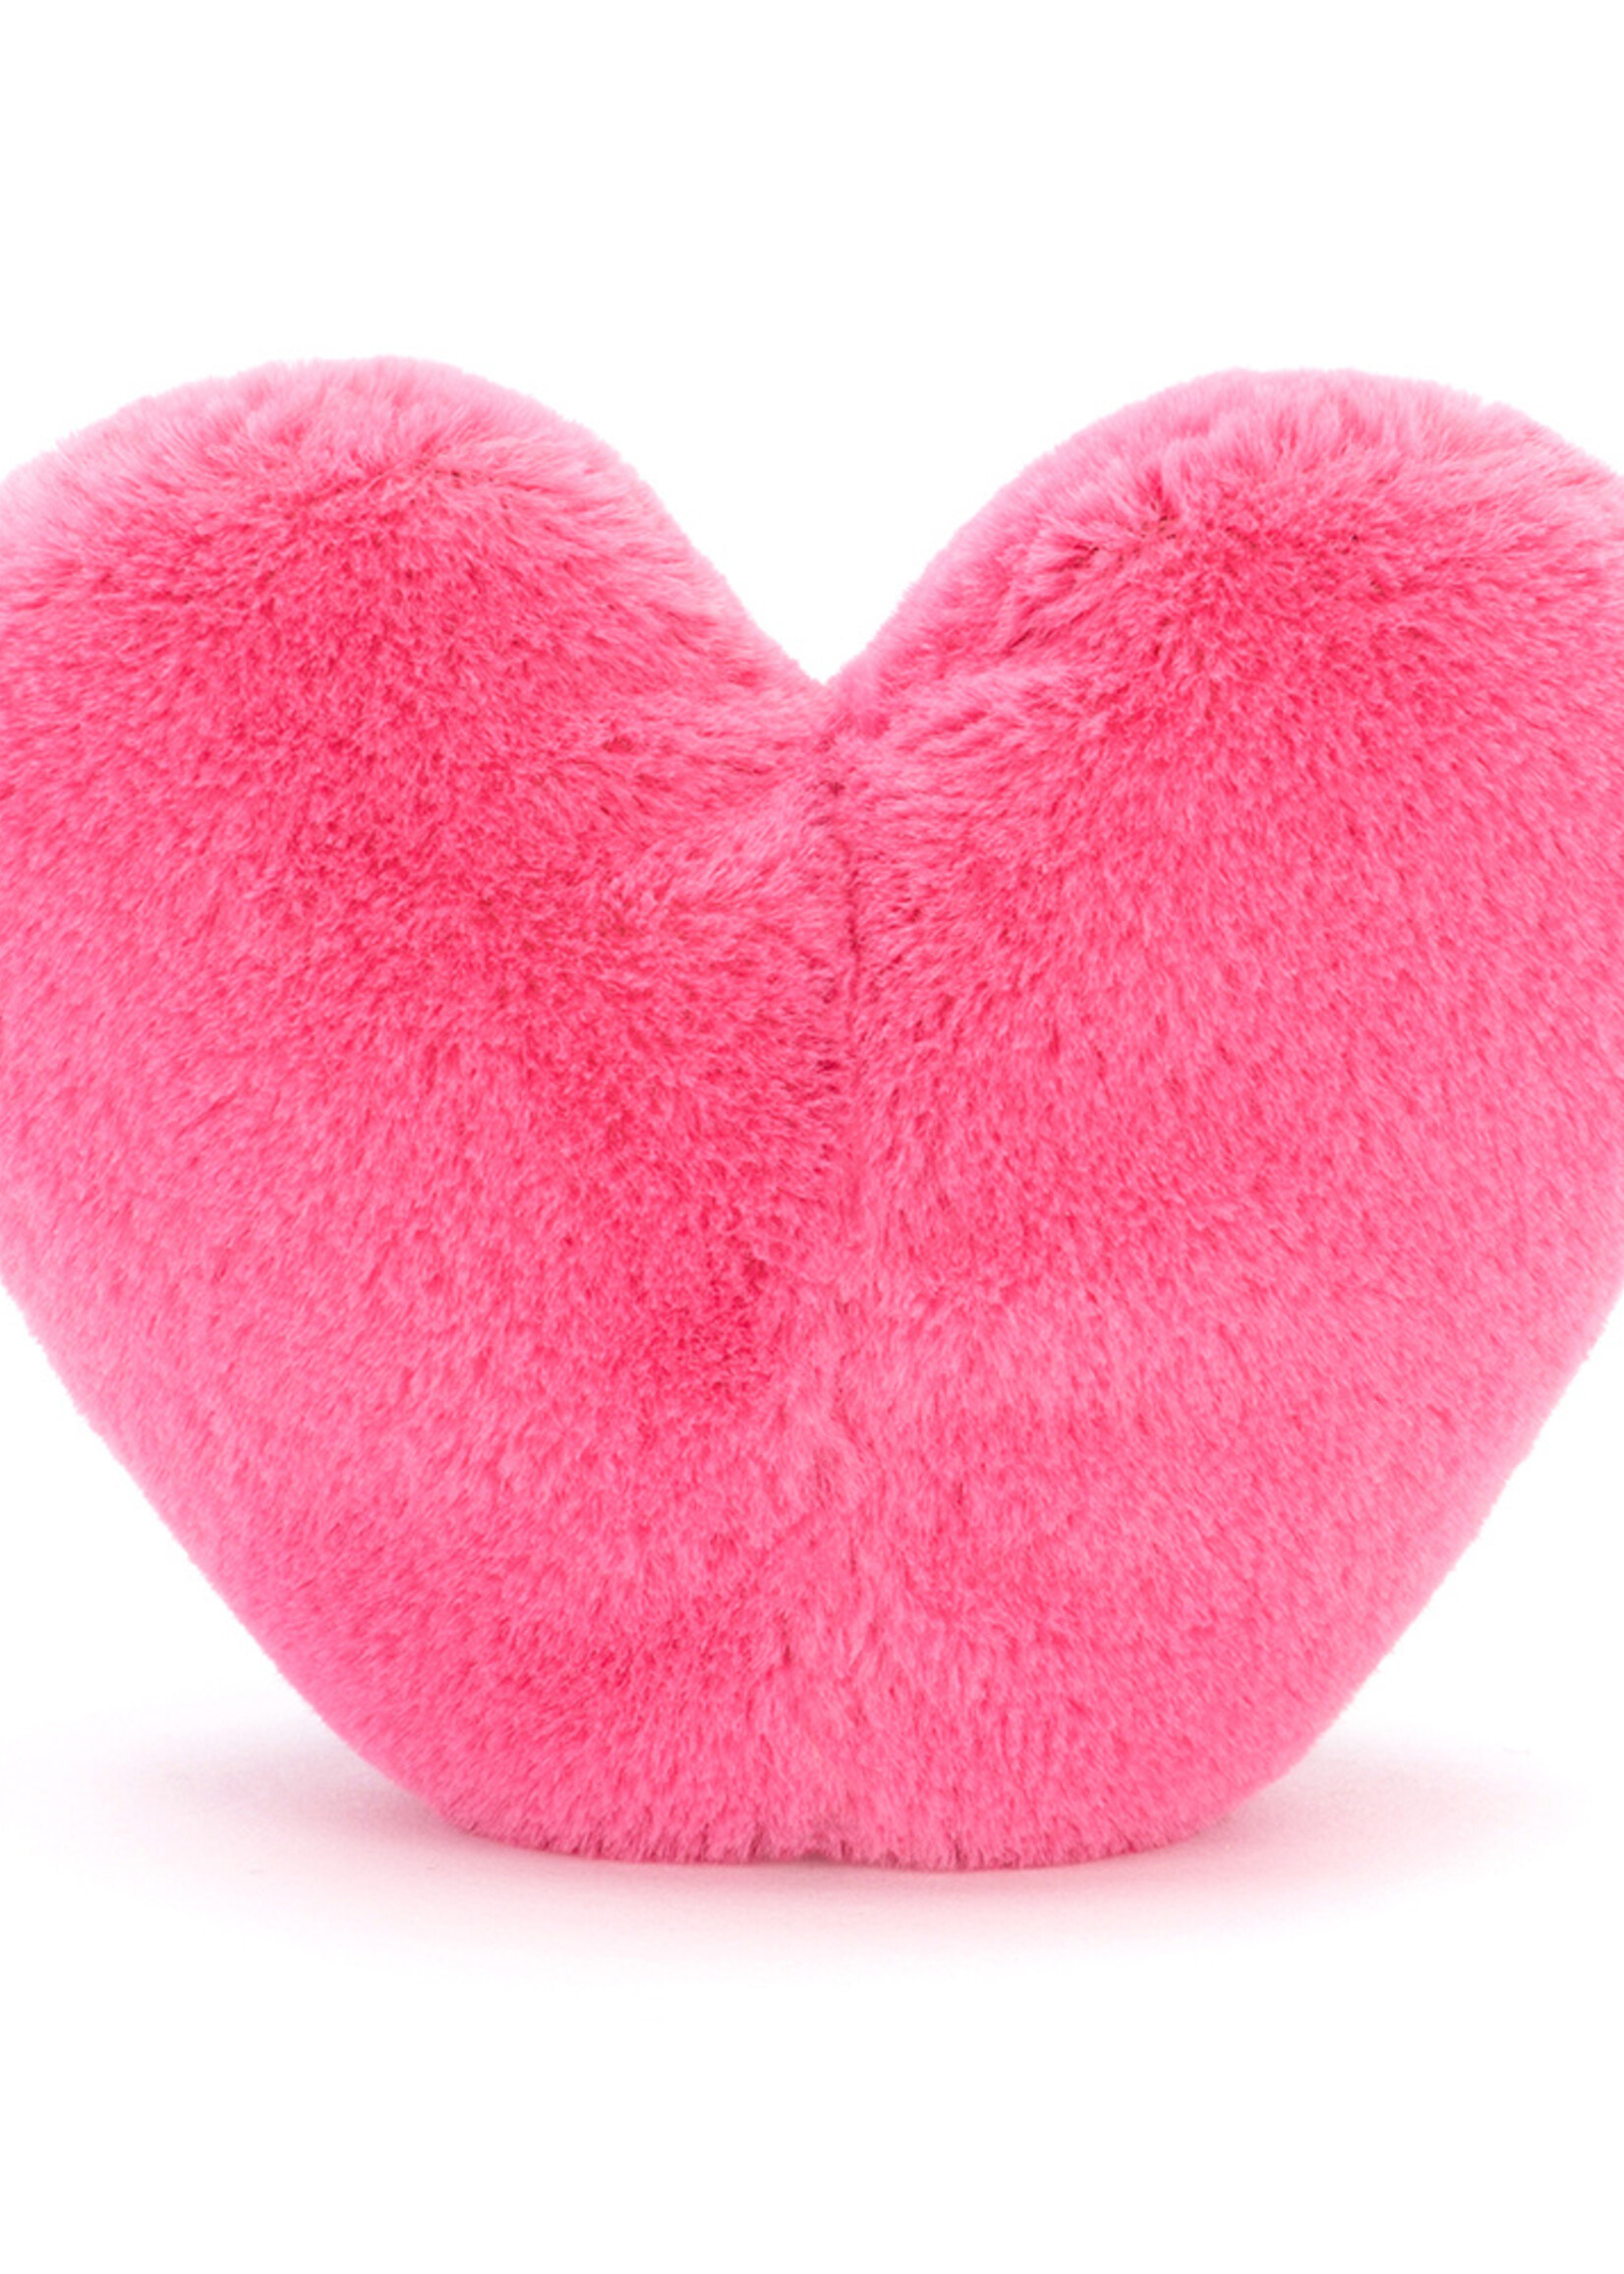 Jellycat Jellycat | Amuseable Hot Pink Heart - Small